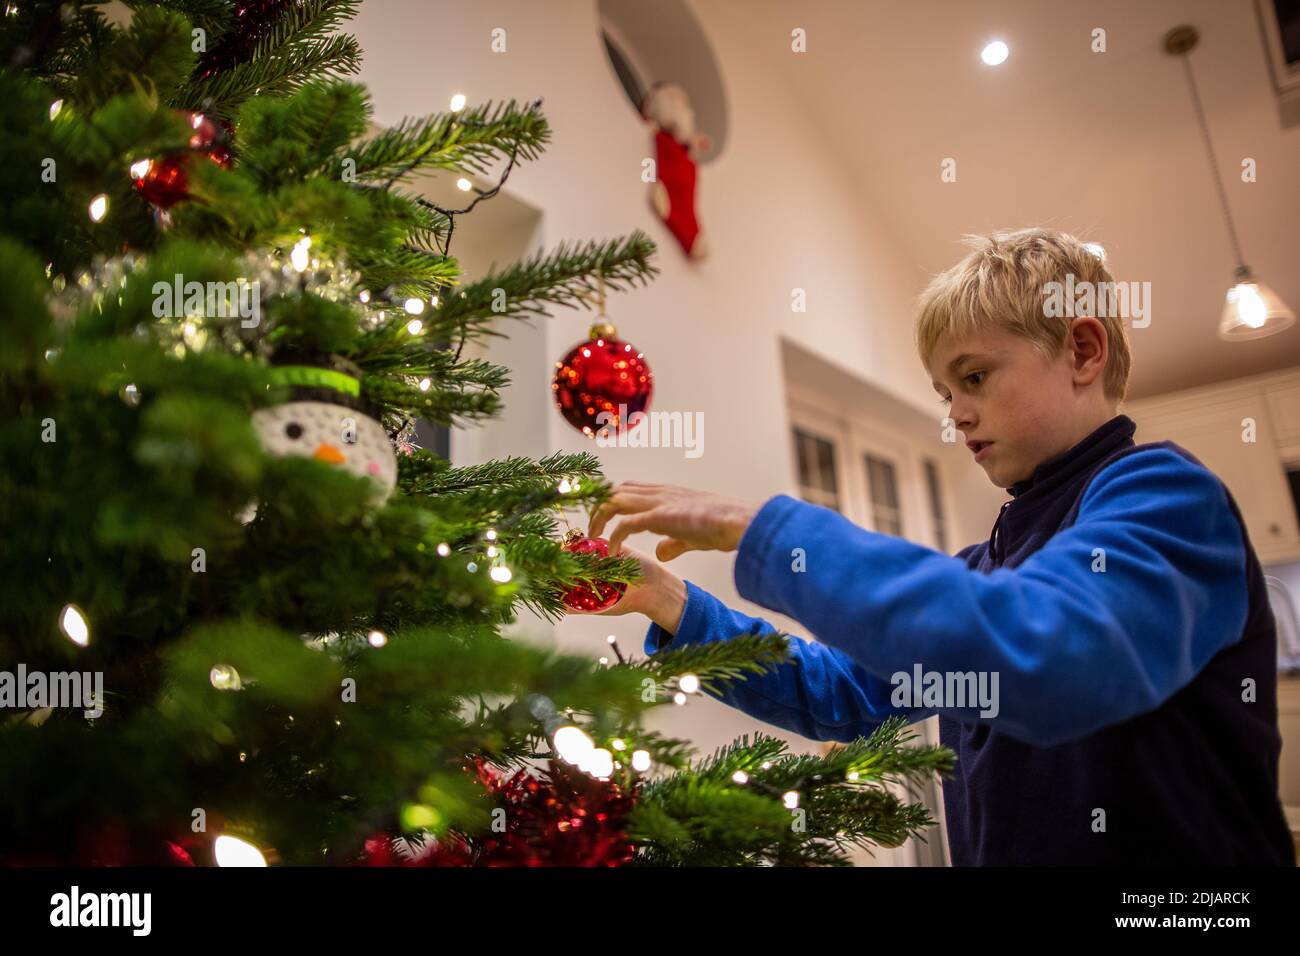 Family at home decorating their Christmas tree ahead of the Xmas festive period, United Kingdom Stock Photo